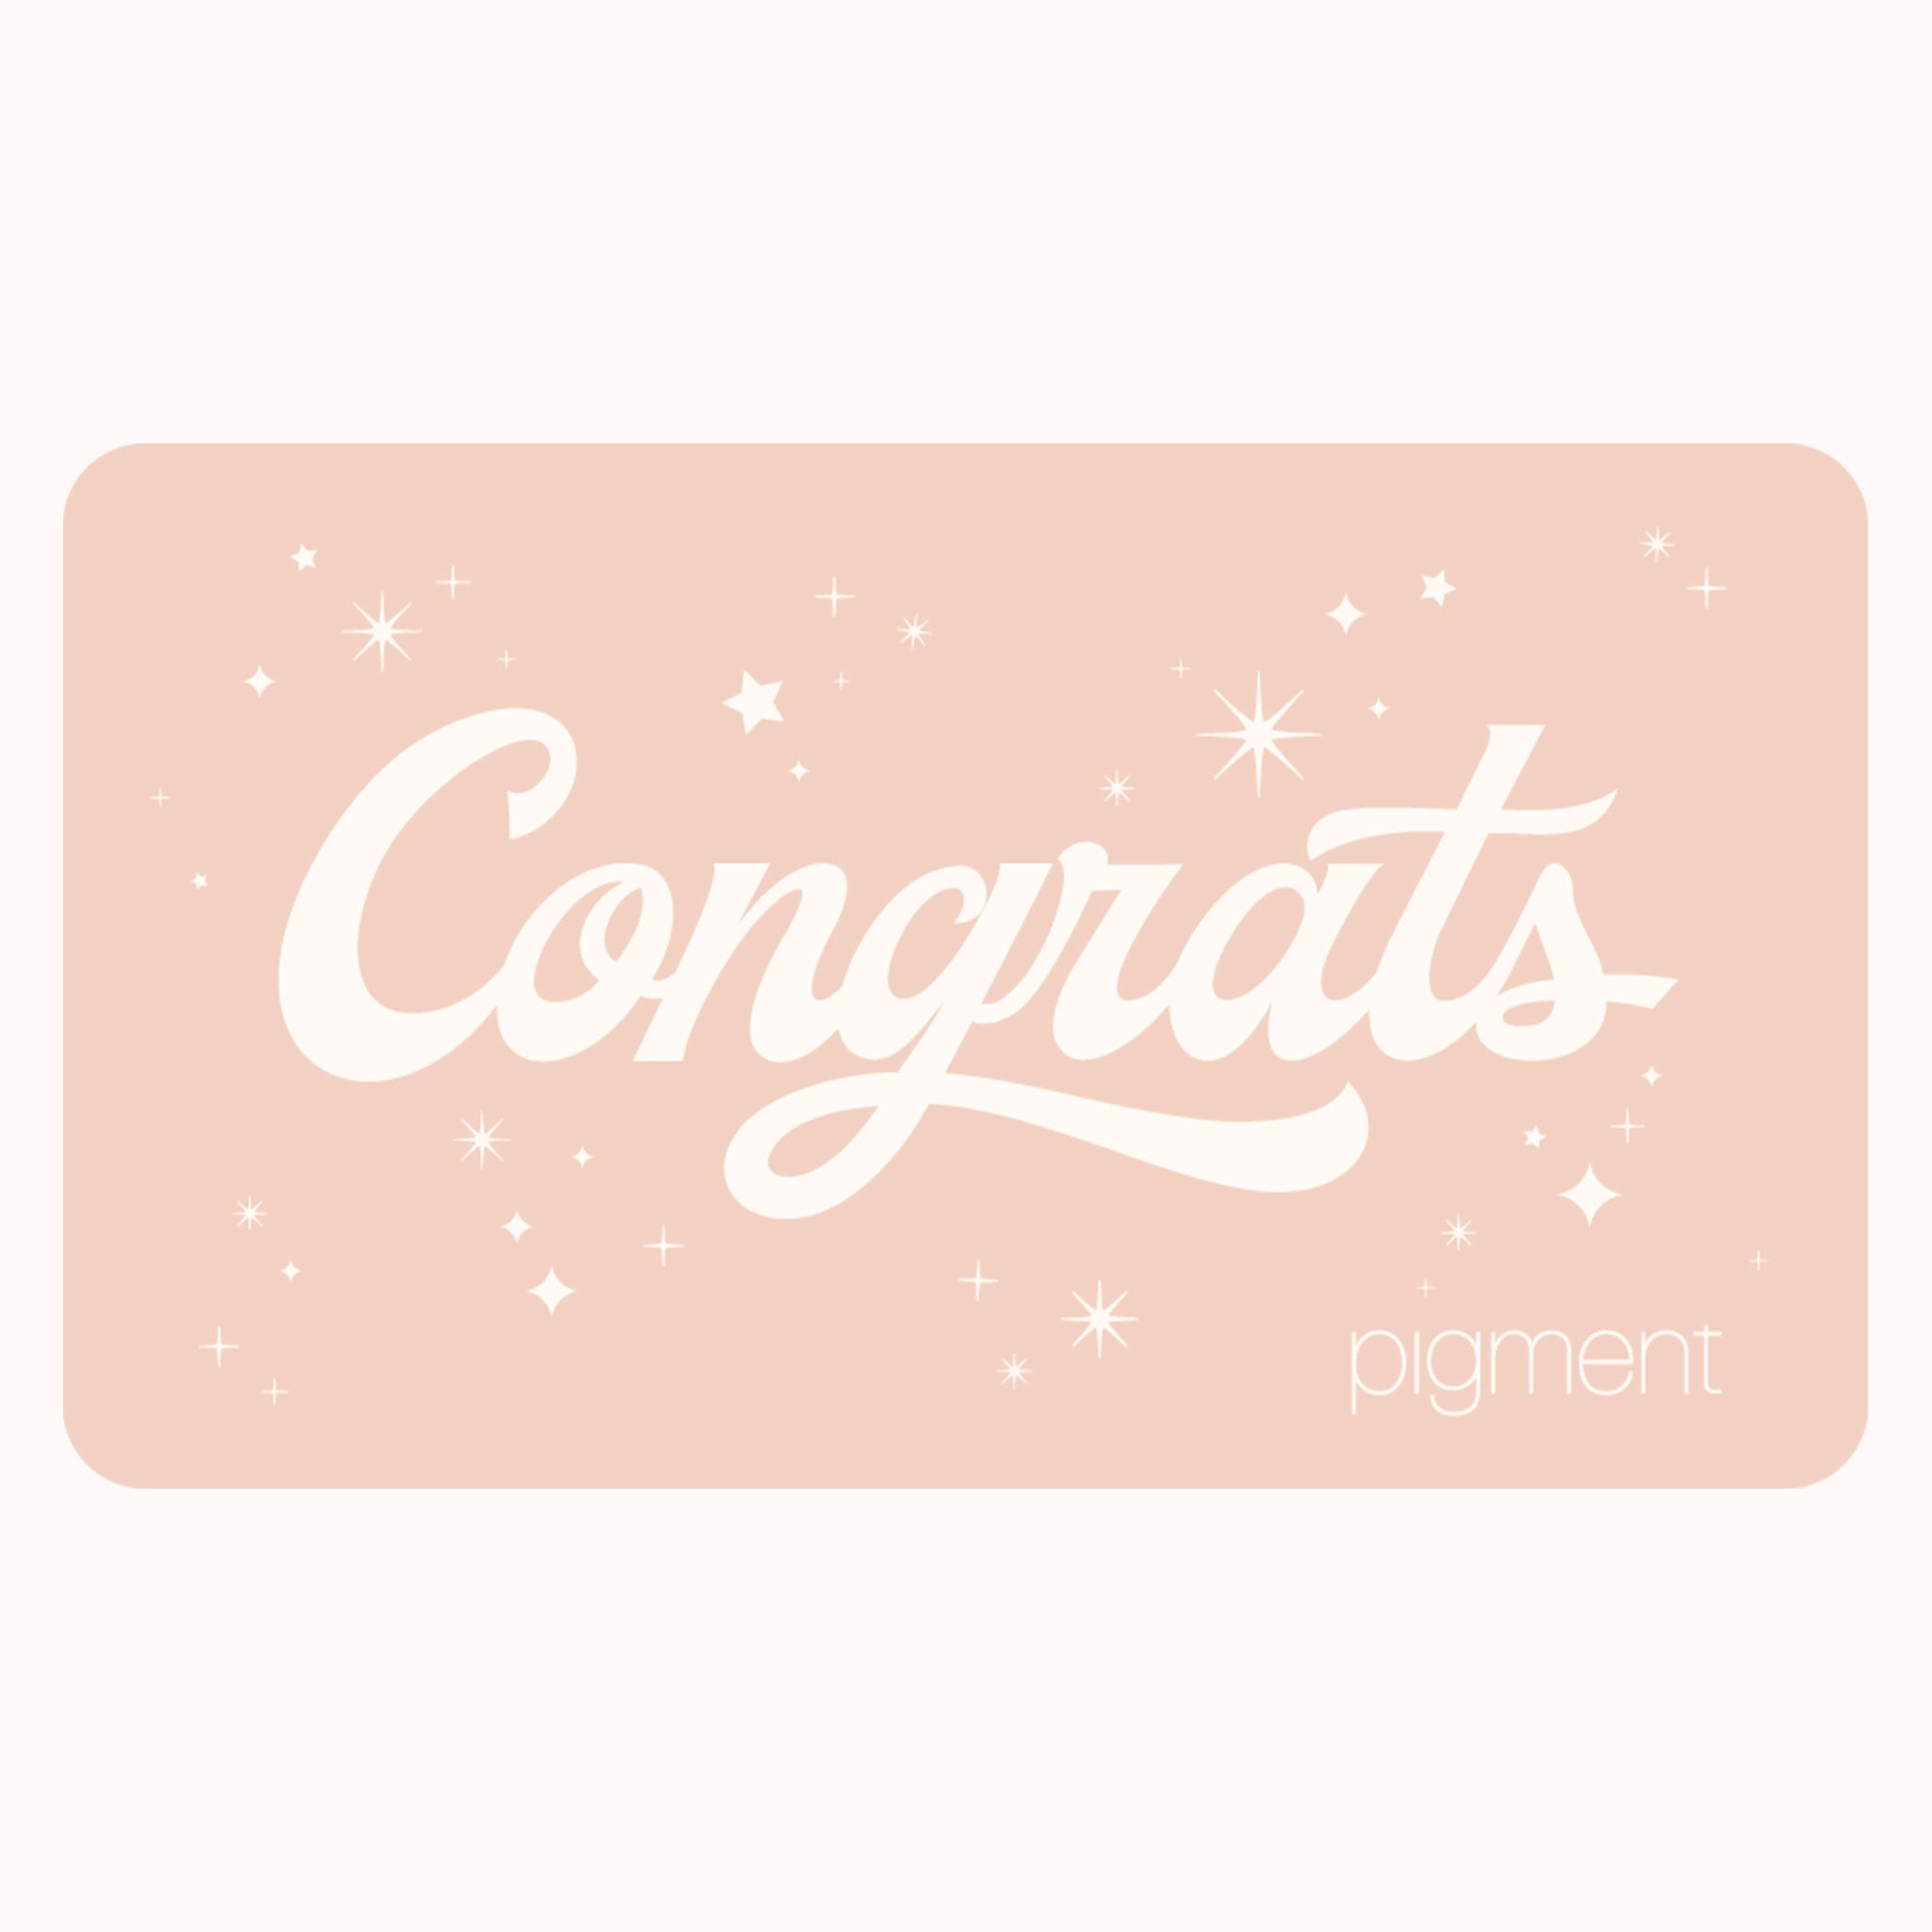 On a white background is a soft pink colored gift card detailed with white sparkle and star accents and white text across the front that reads, &quot;Congrats&quot; along with smaller text in the bottom right corner that says, &quot;Pigment&quot;.